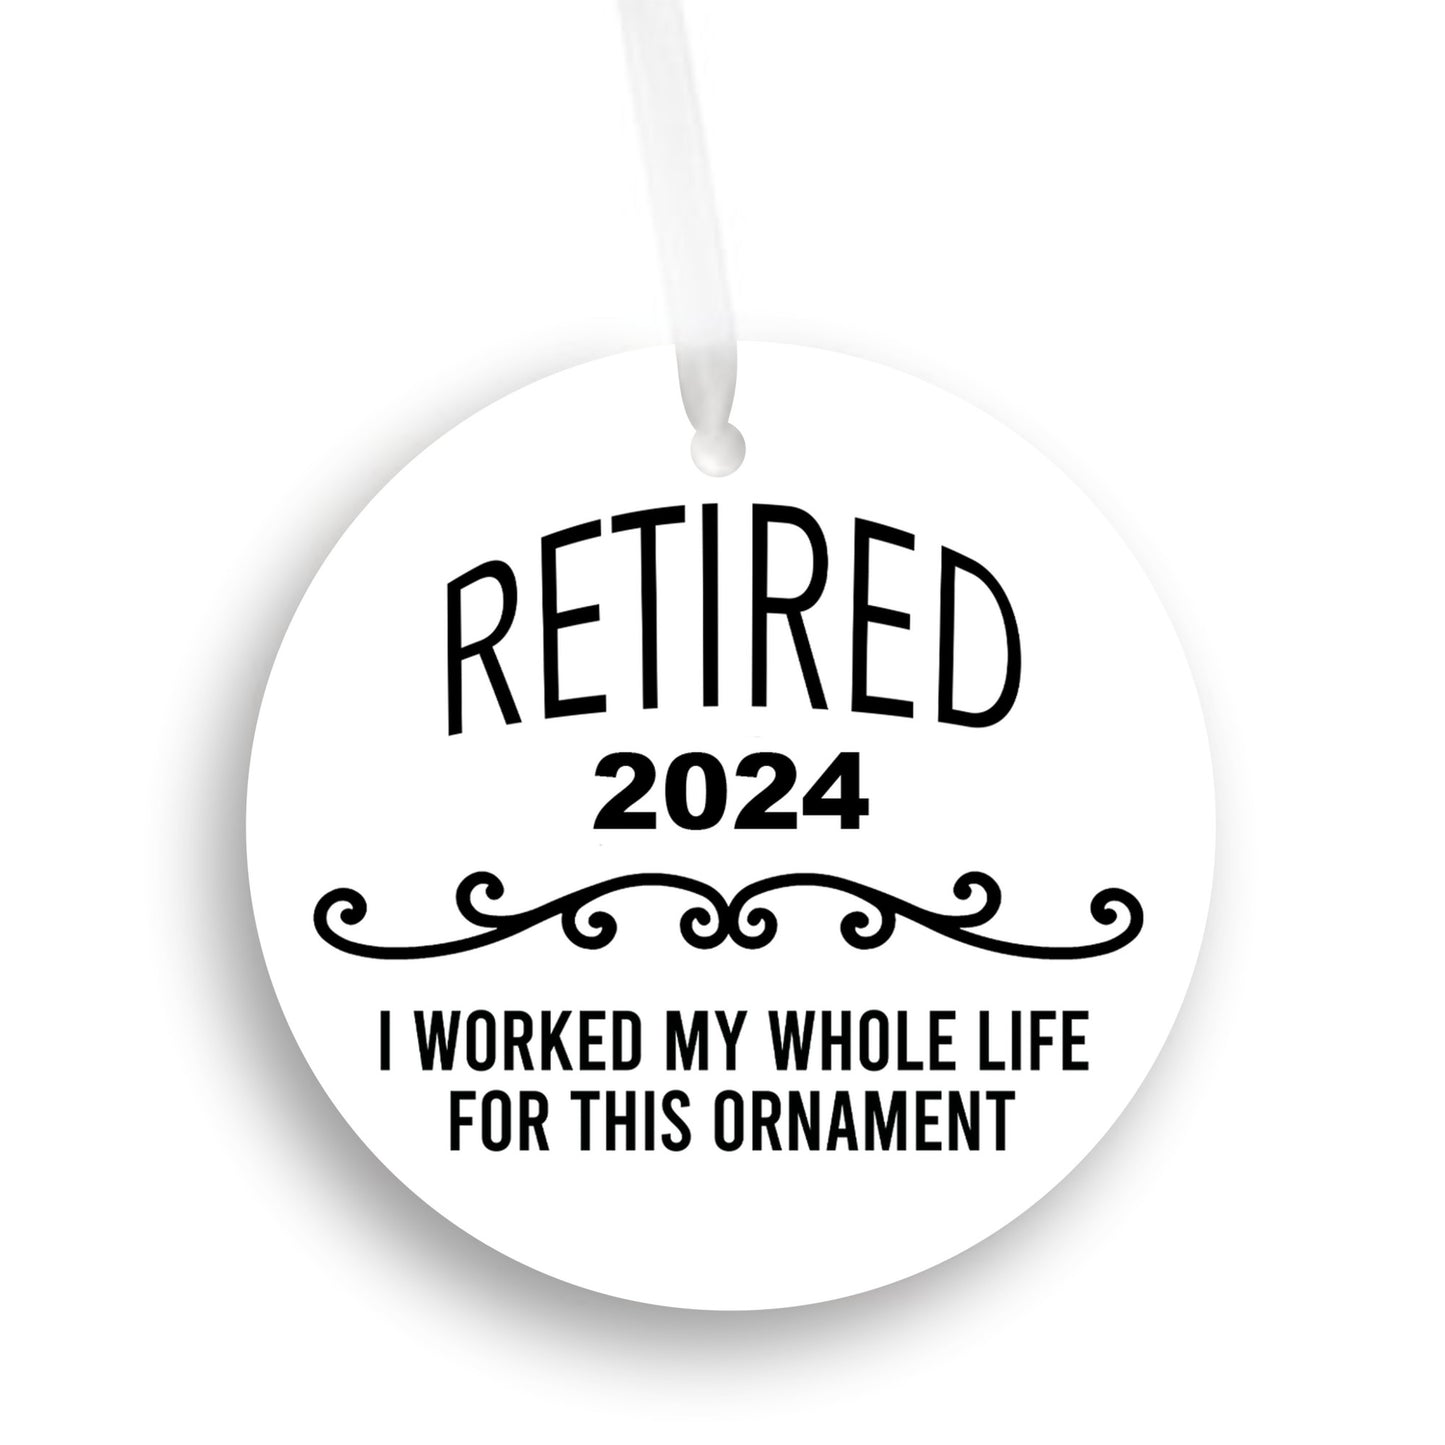 Retired 2024 I worked my whole life for this ornament